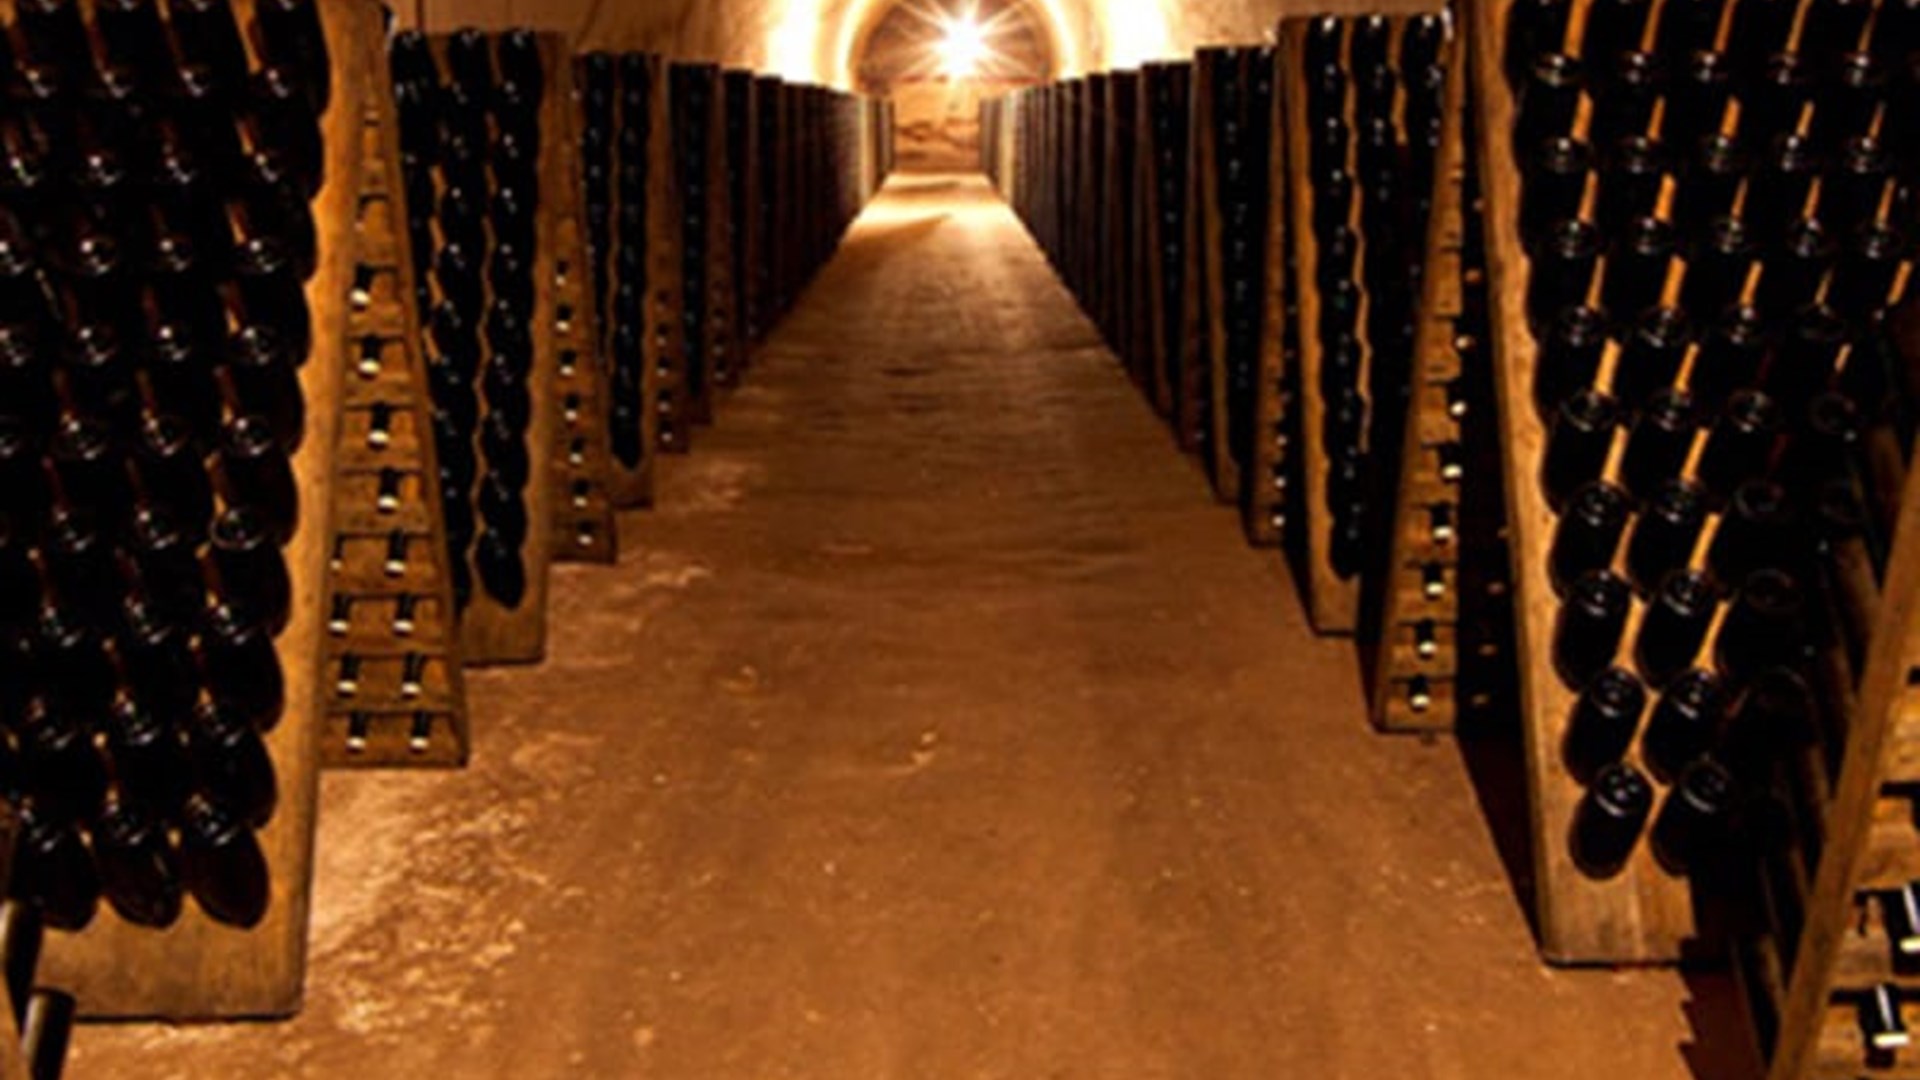 Champagne stored for second fermentation in the cellar of Pol Roger